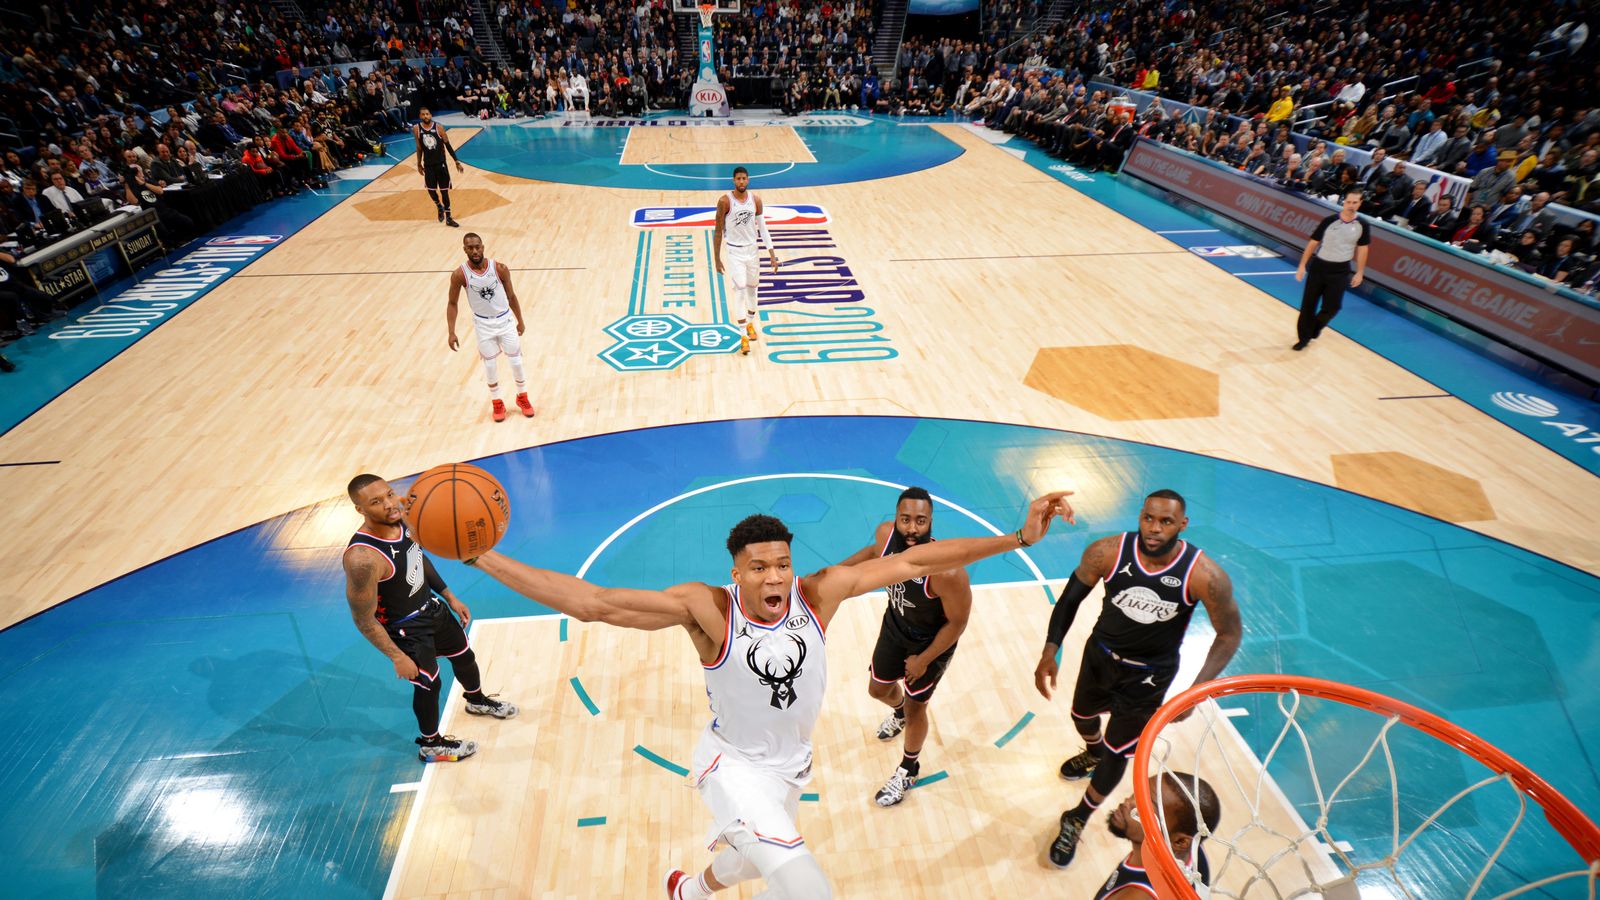 All-Star 2019: Giannis Antetokounmpo top scores in All-Star Game with 38 points | NBA ...